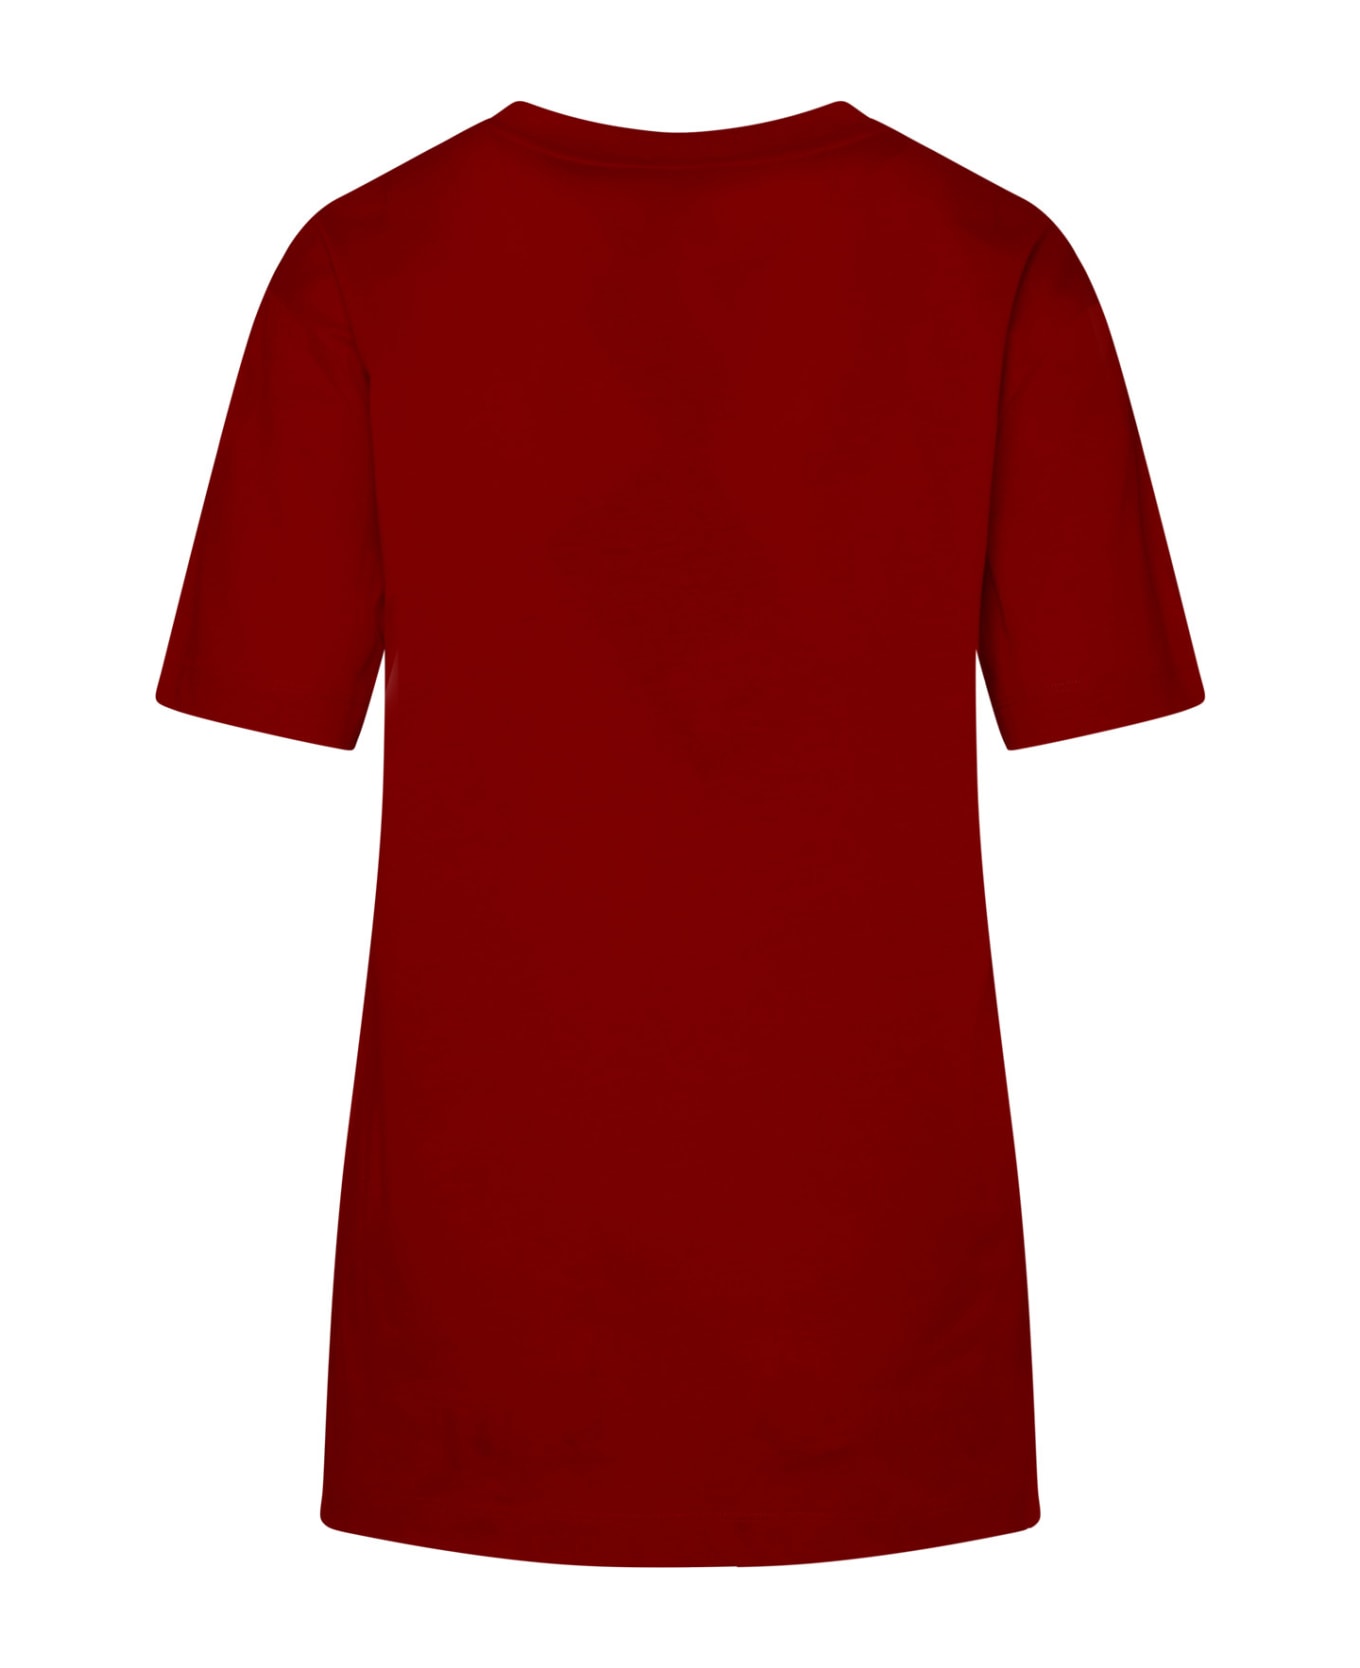 Patou Red Cotton T-shirt - Red